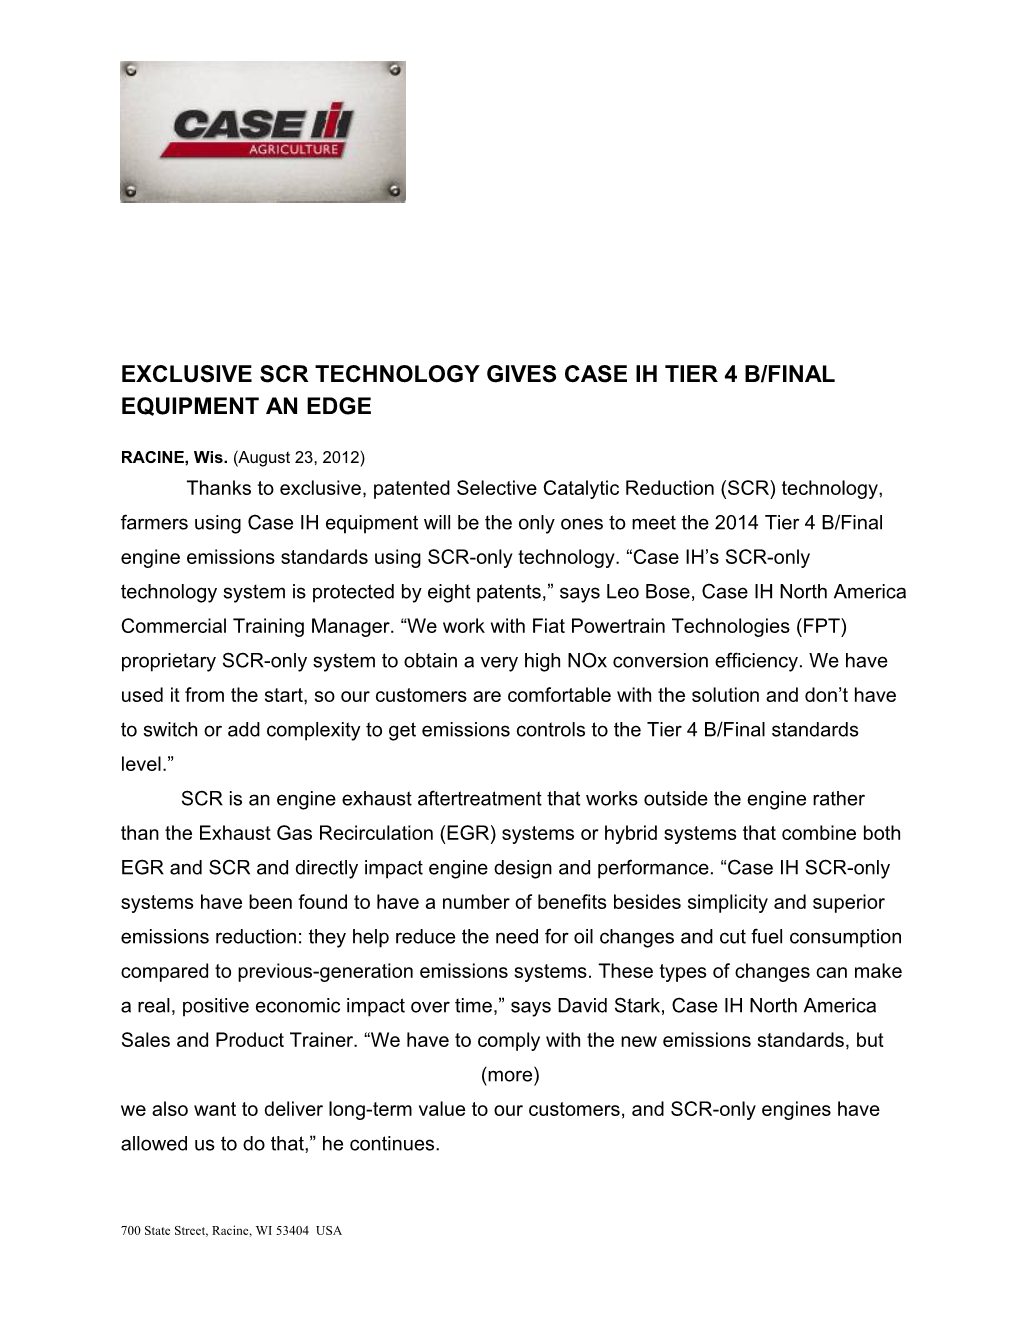 Exclusive Scr Technology Gives Case Ih Tier 4 B/Final Equipment an Edge